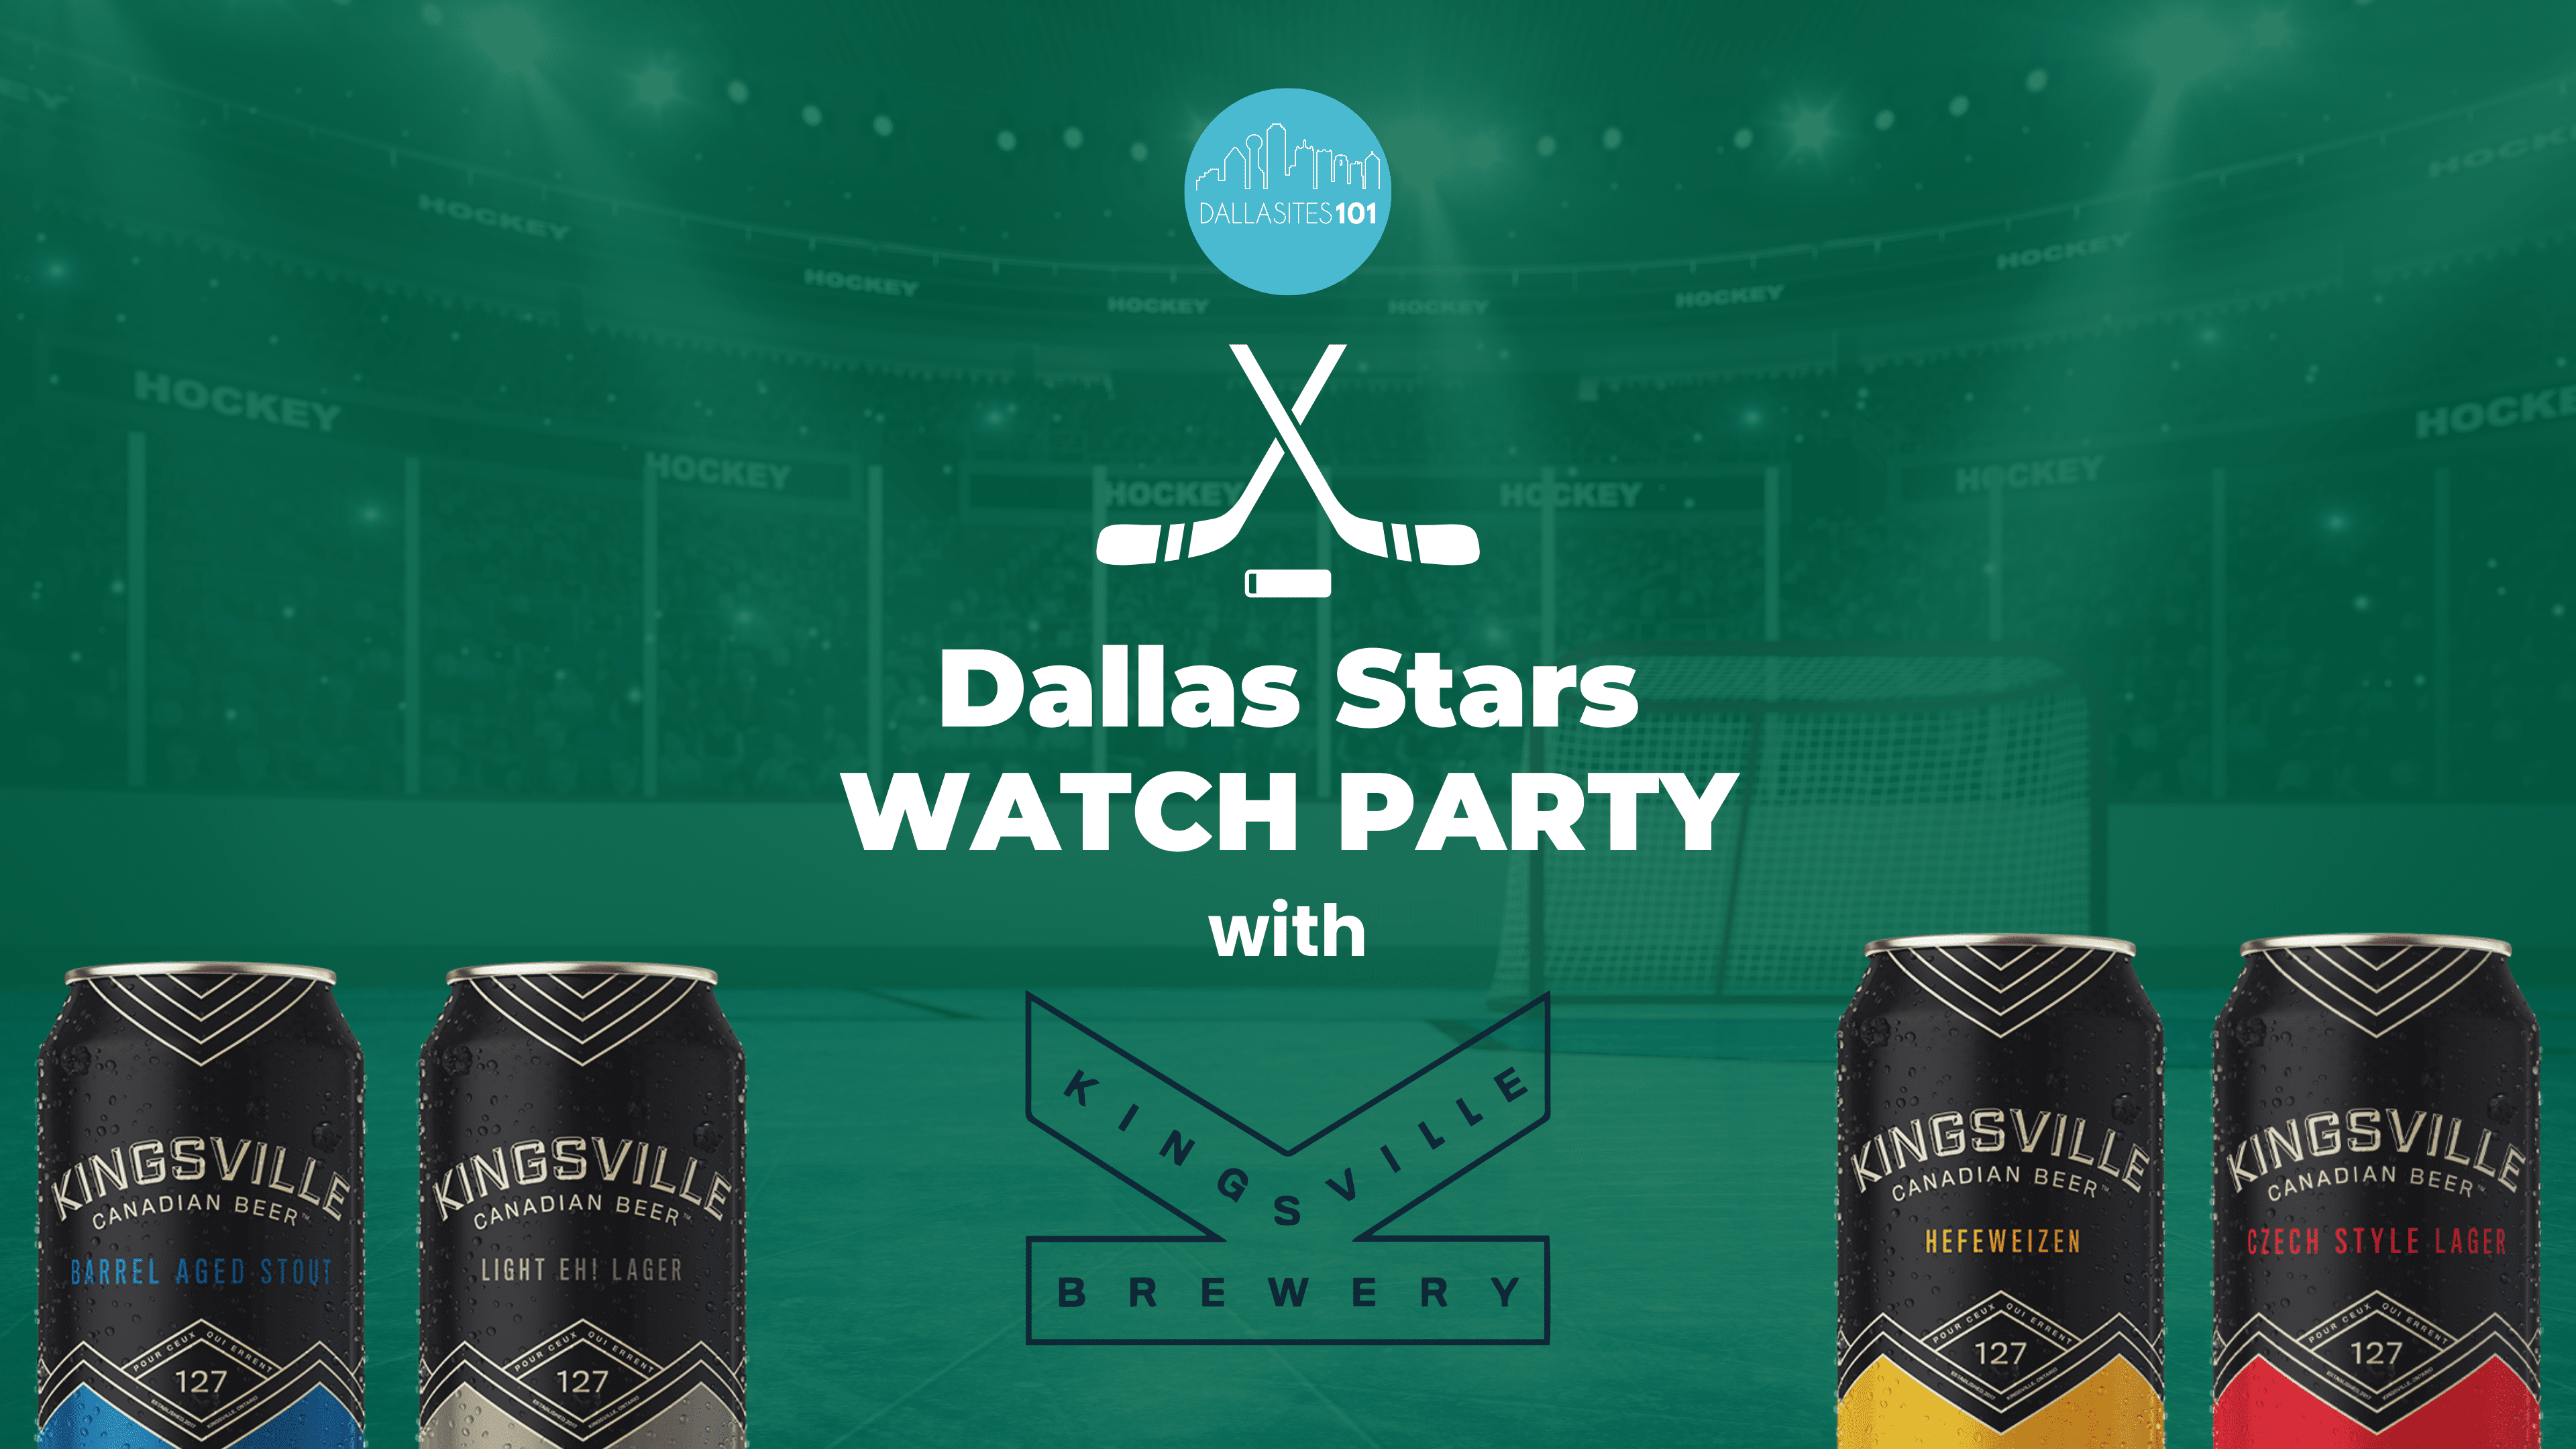 Dallas Stars Watch Party with Kingsville Brewing & Dallasites101